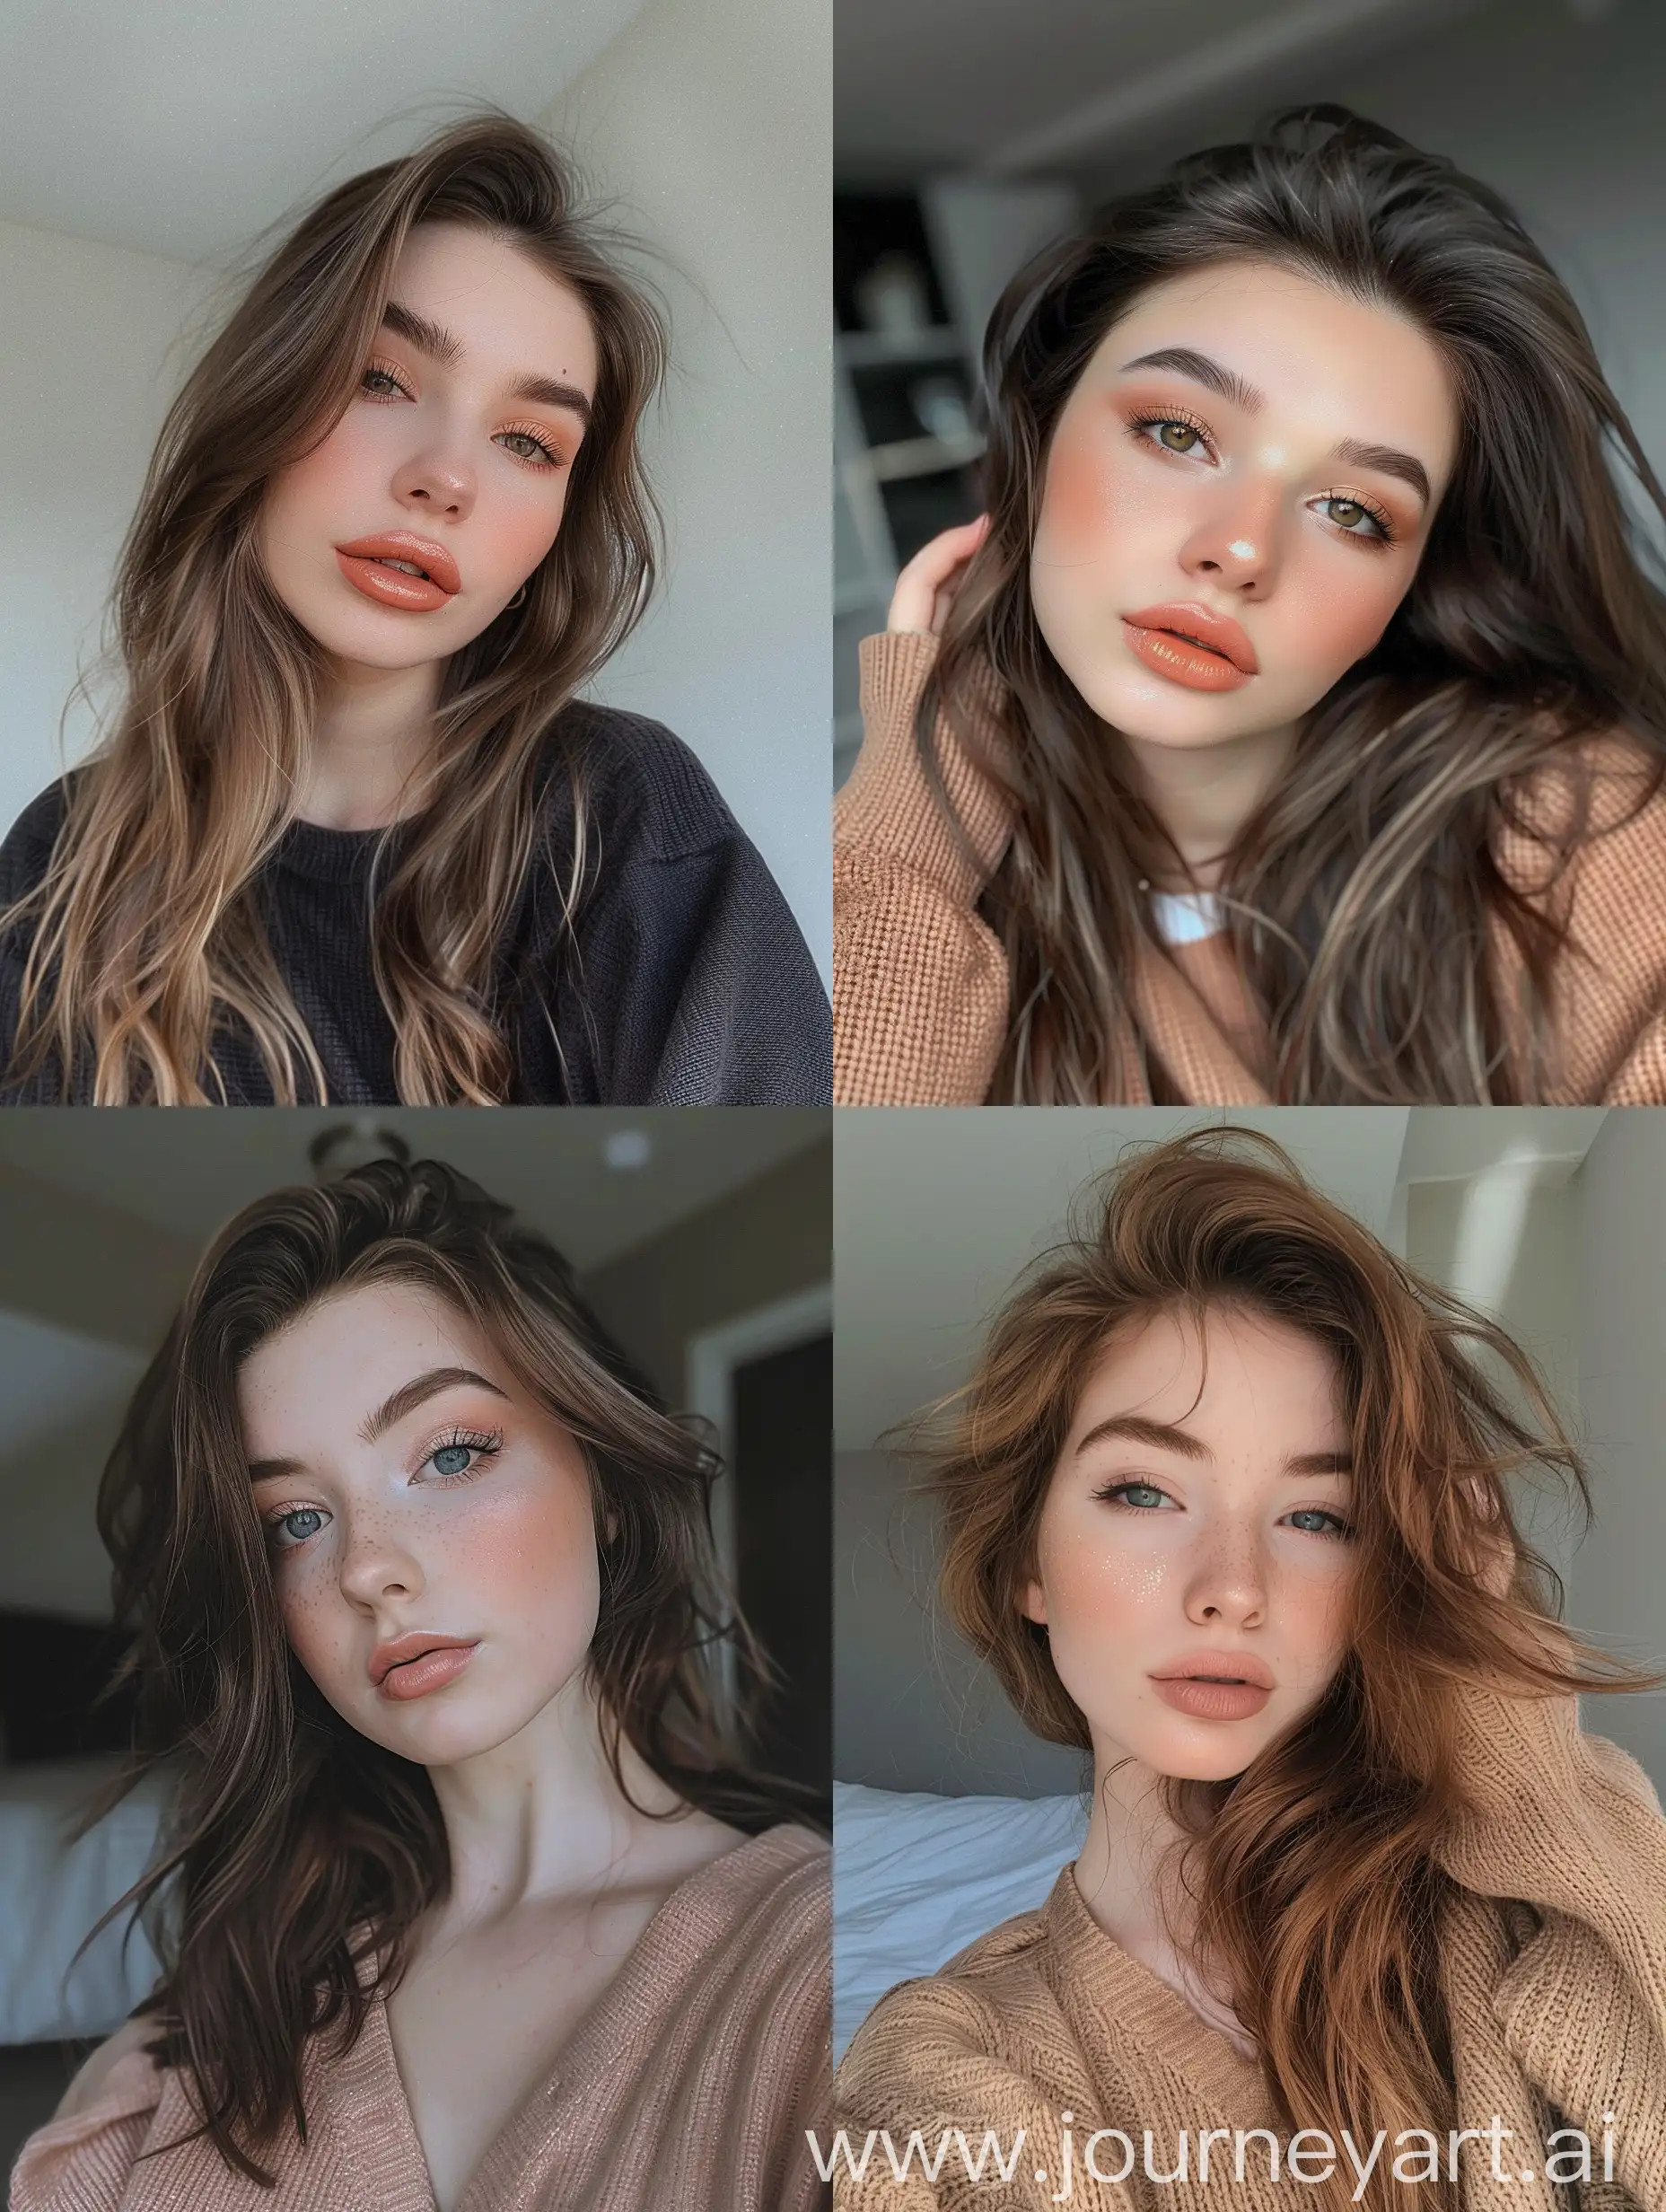 Young-Beauty-Instagram-Selfie-of-a-19YearOld-Influencer